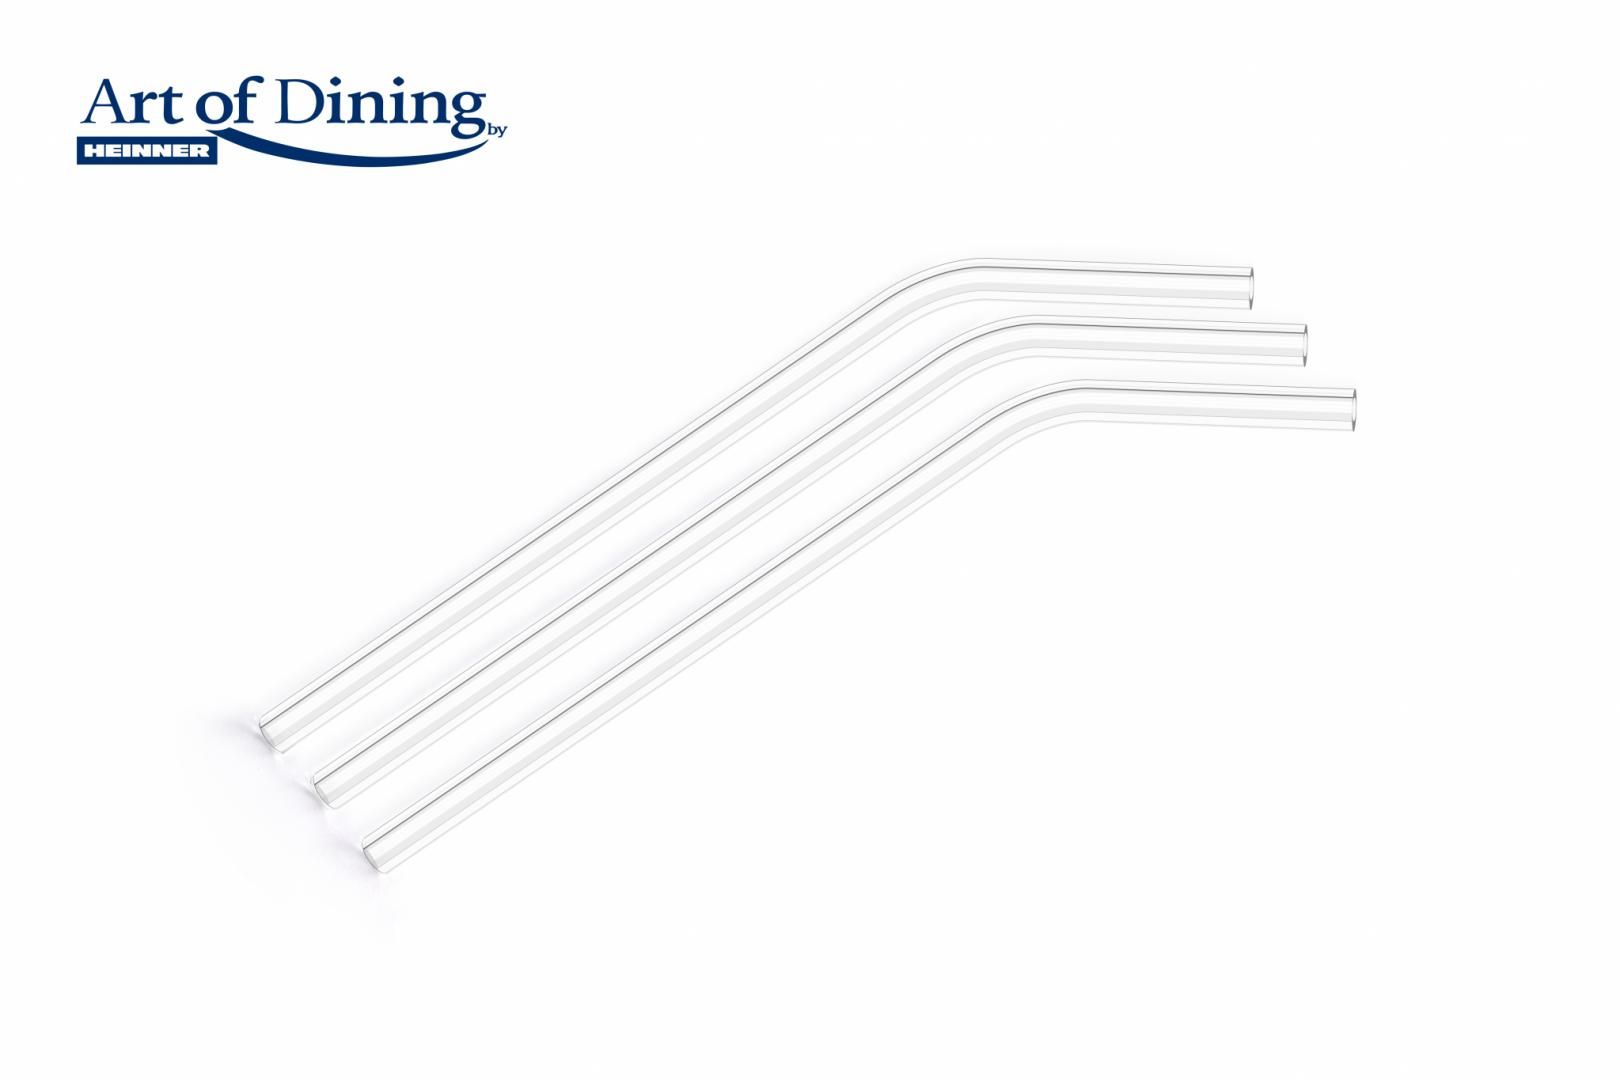 SET OF 6 STRAWS MADE OF GLASS + BRUSH FOR CLEANING the set contains: : 3 x straight straw + 3 x bent straw + 1 x brush for cleaning Sizes:200*8mm Weight / straw : 14.5g Material thickness:1.5 mm Color: transparent_6